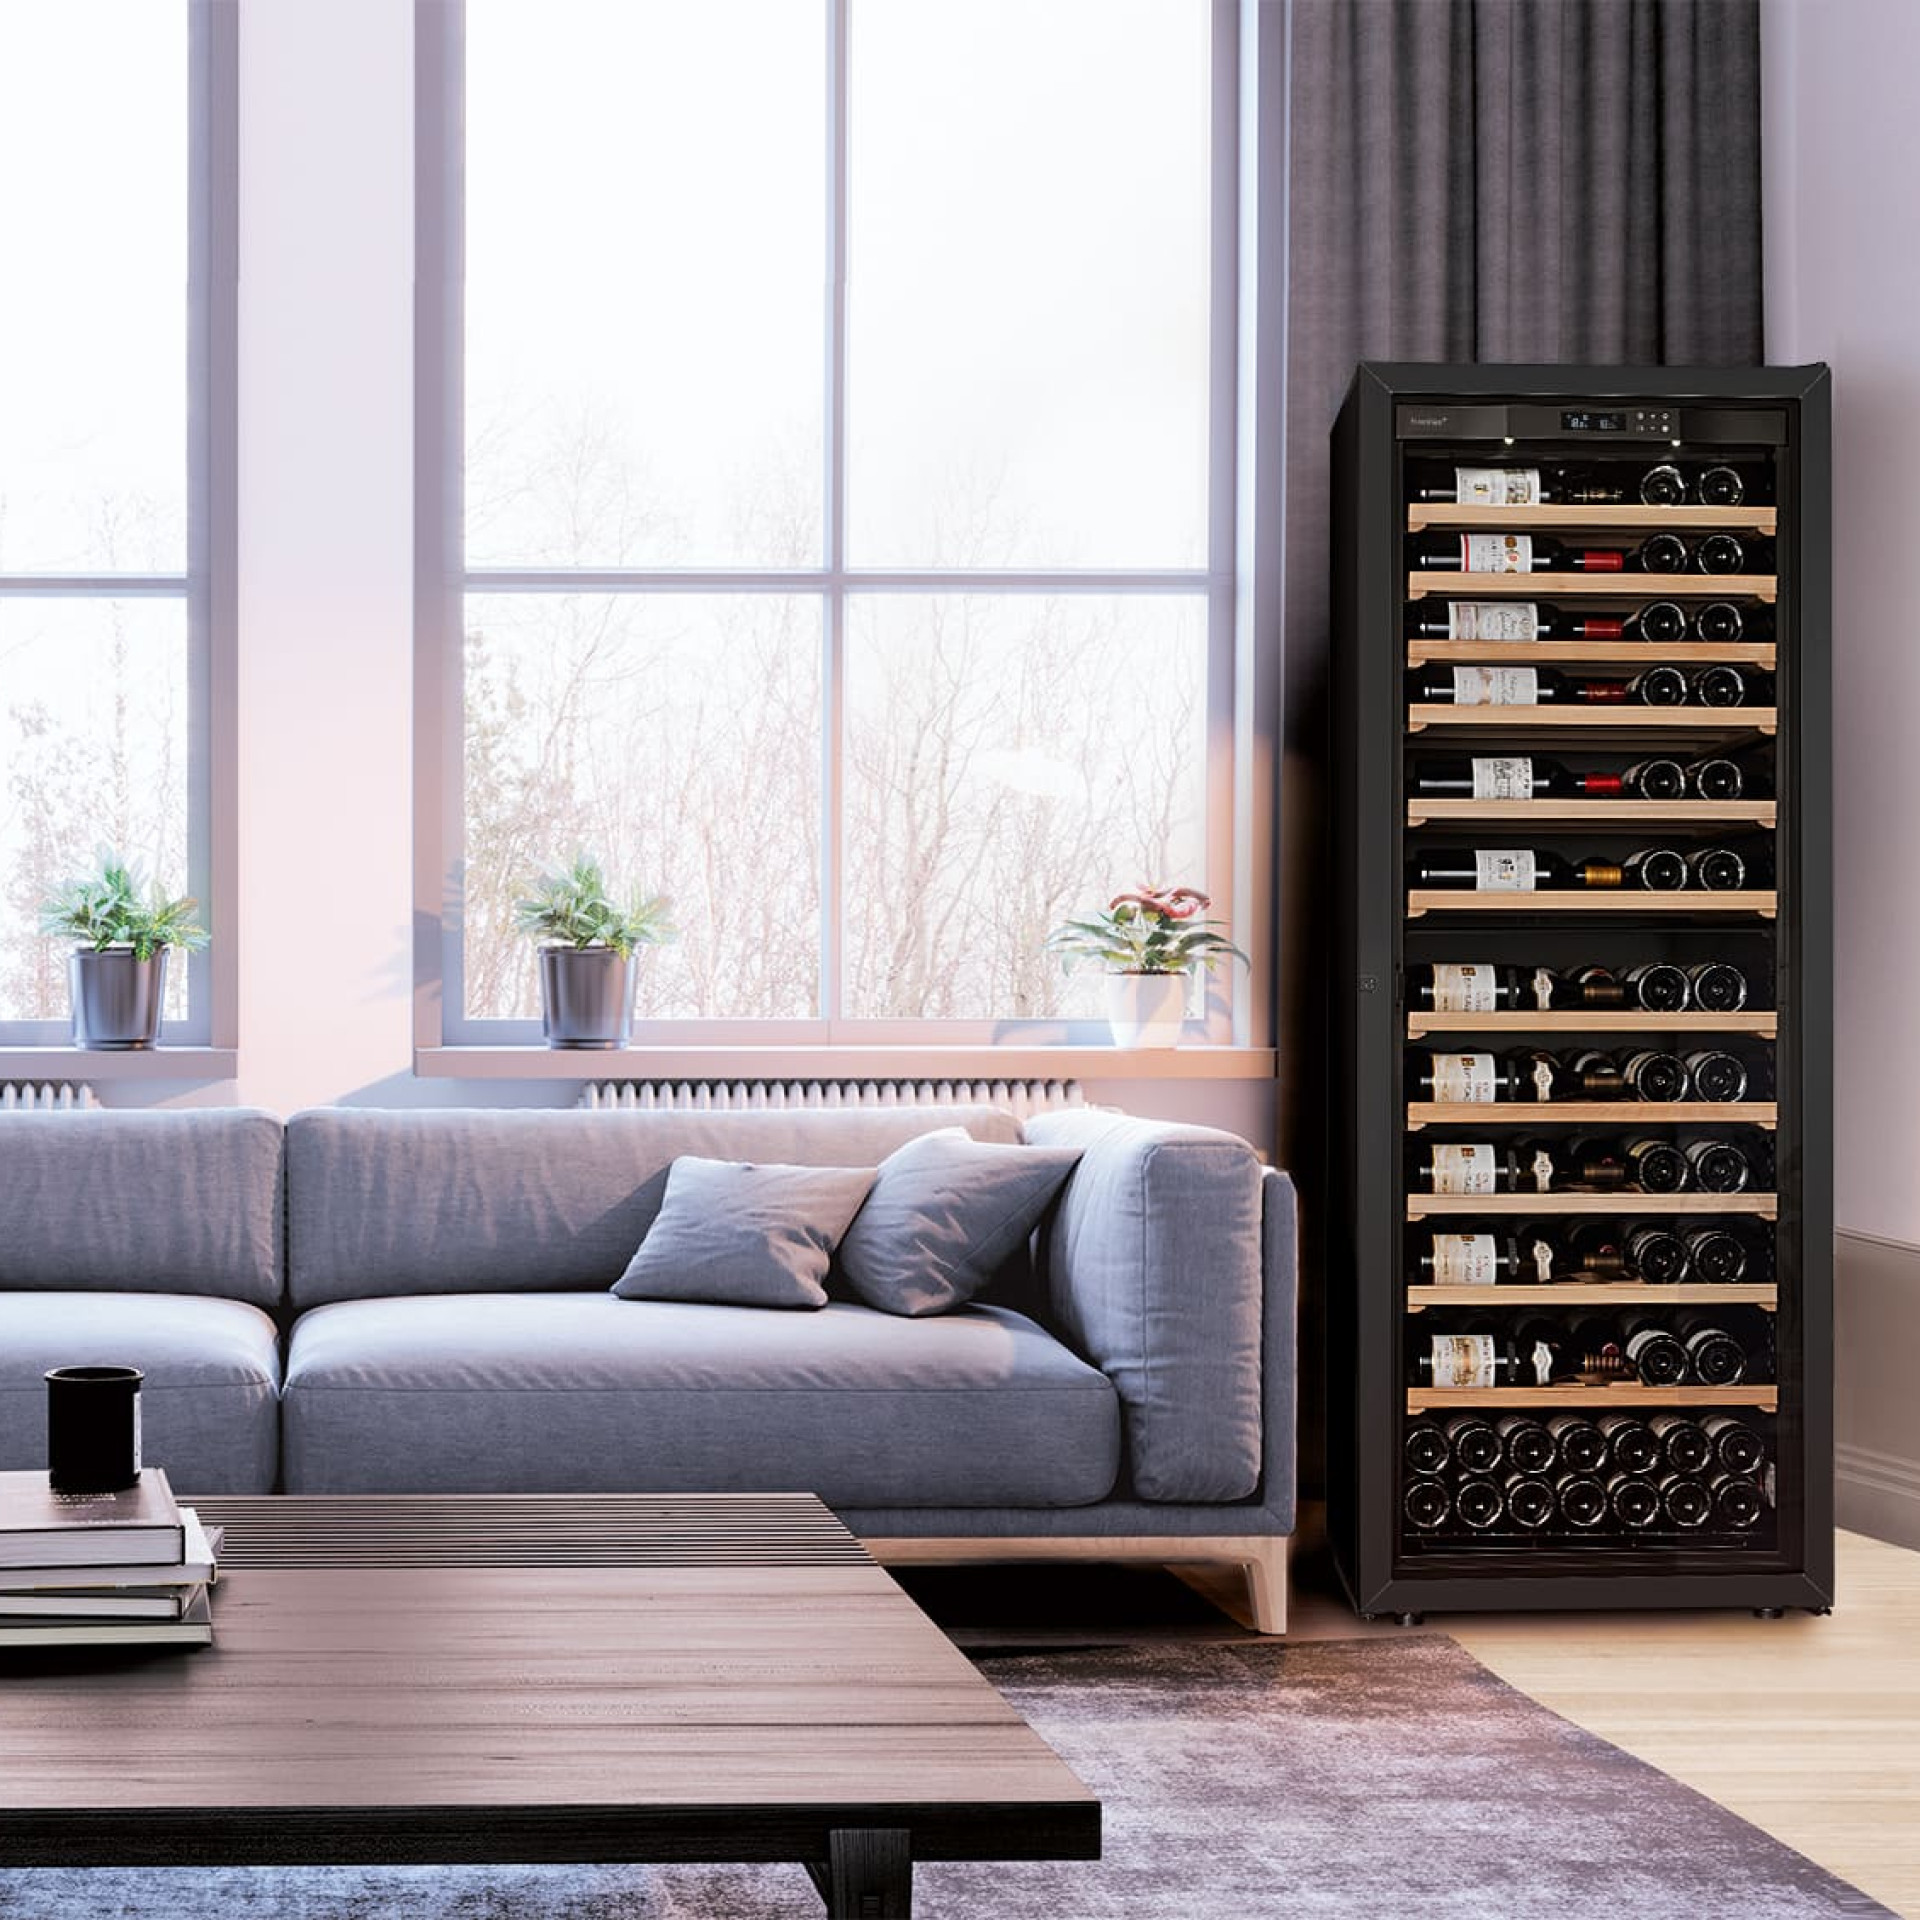 2-temperature, 3-temperature or multi-temperature wine coolers for serving wines